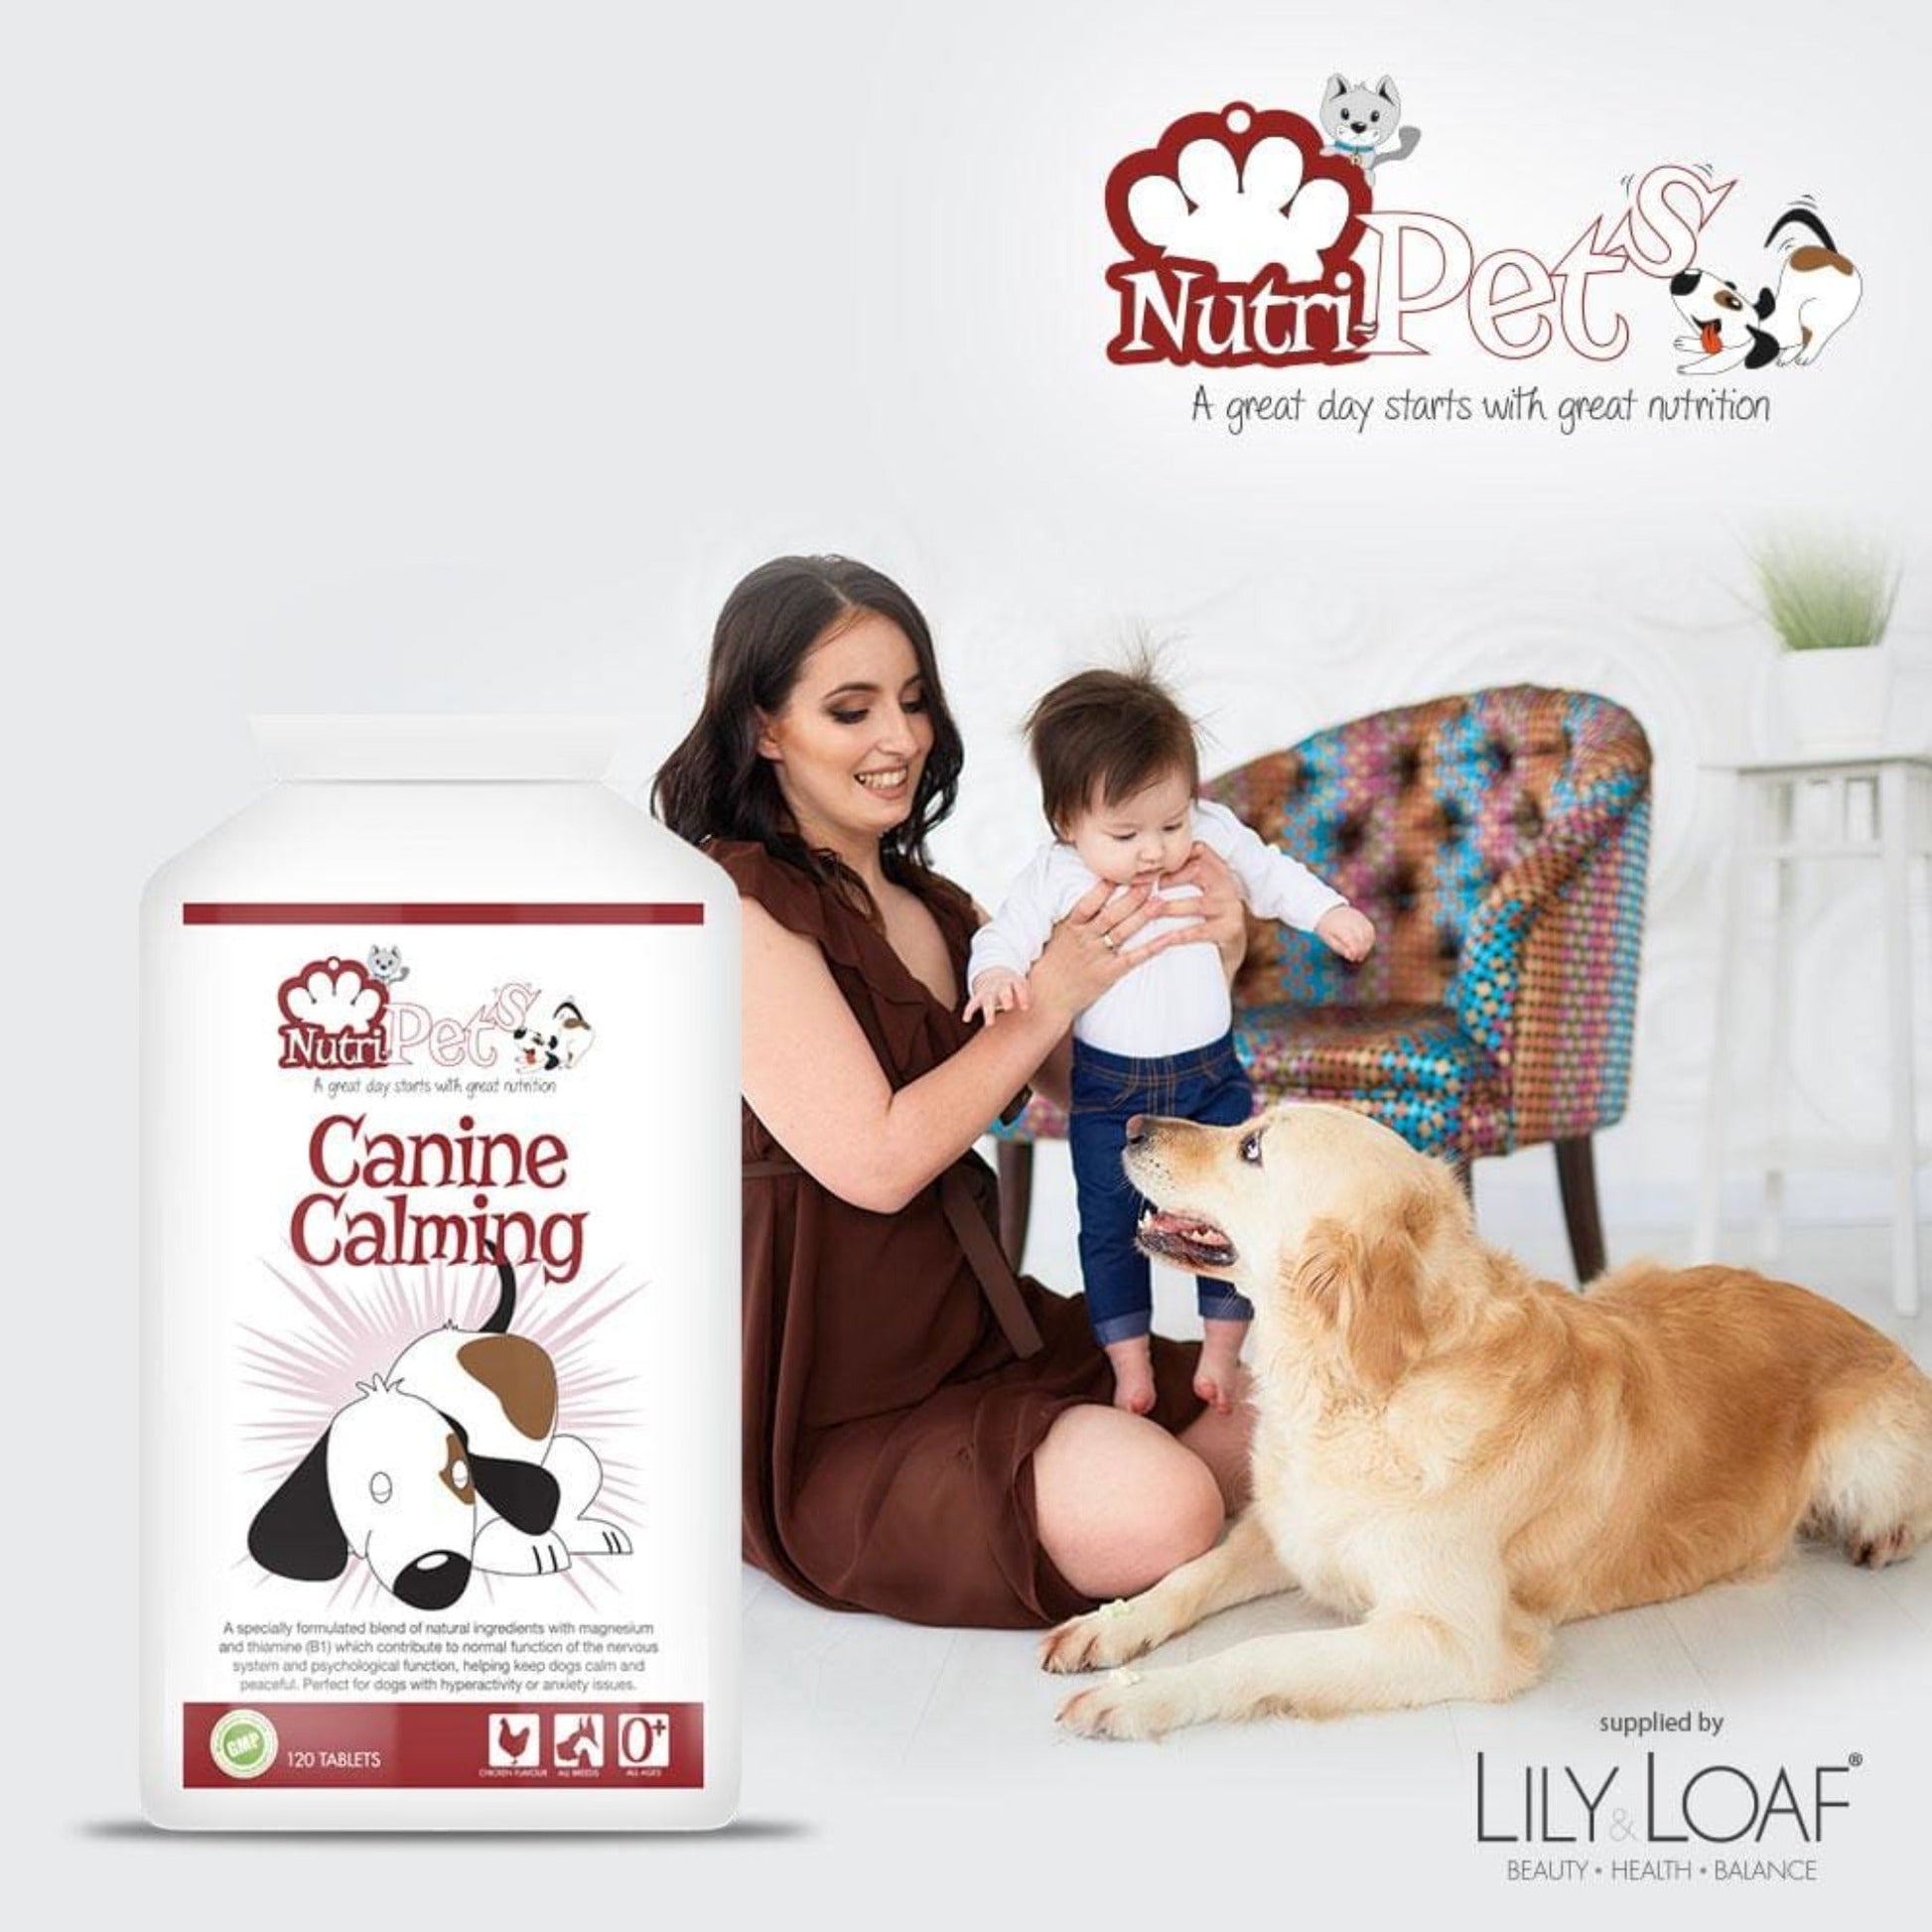 A woman holding a baby stroking a Labrador with a bottle of Nutri-Pets Canine Calming in the foreground